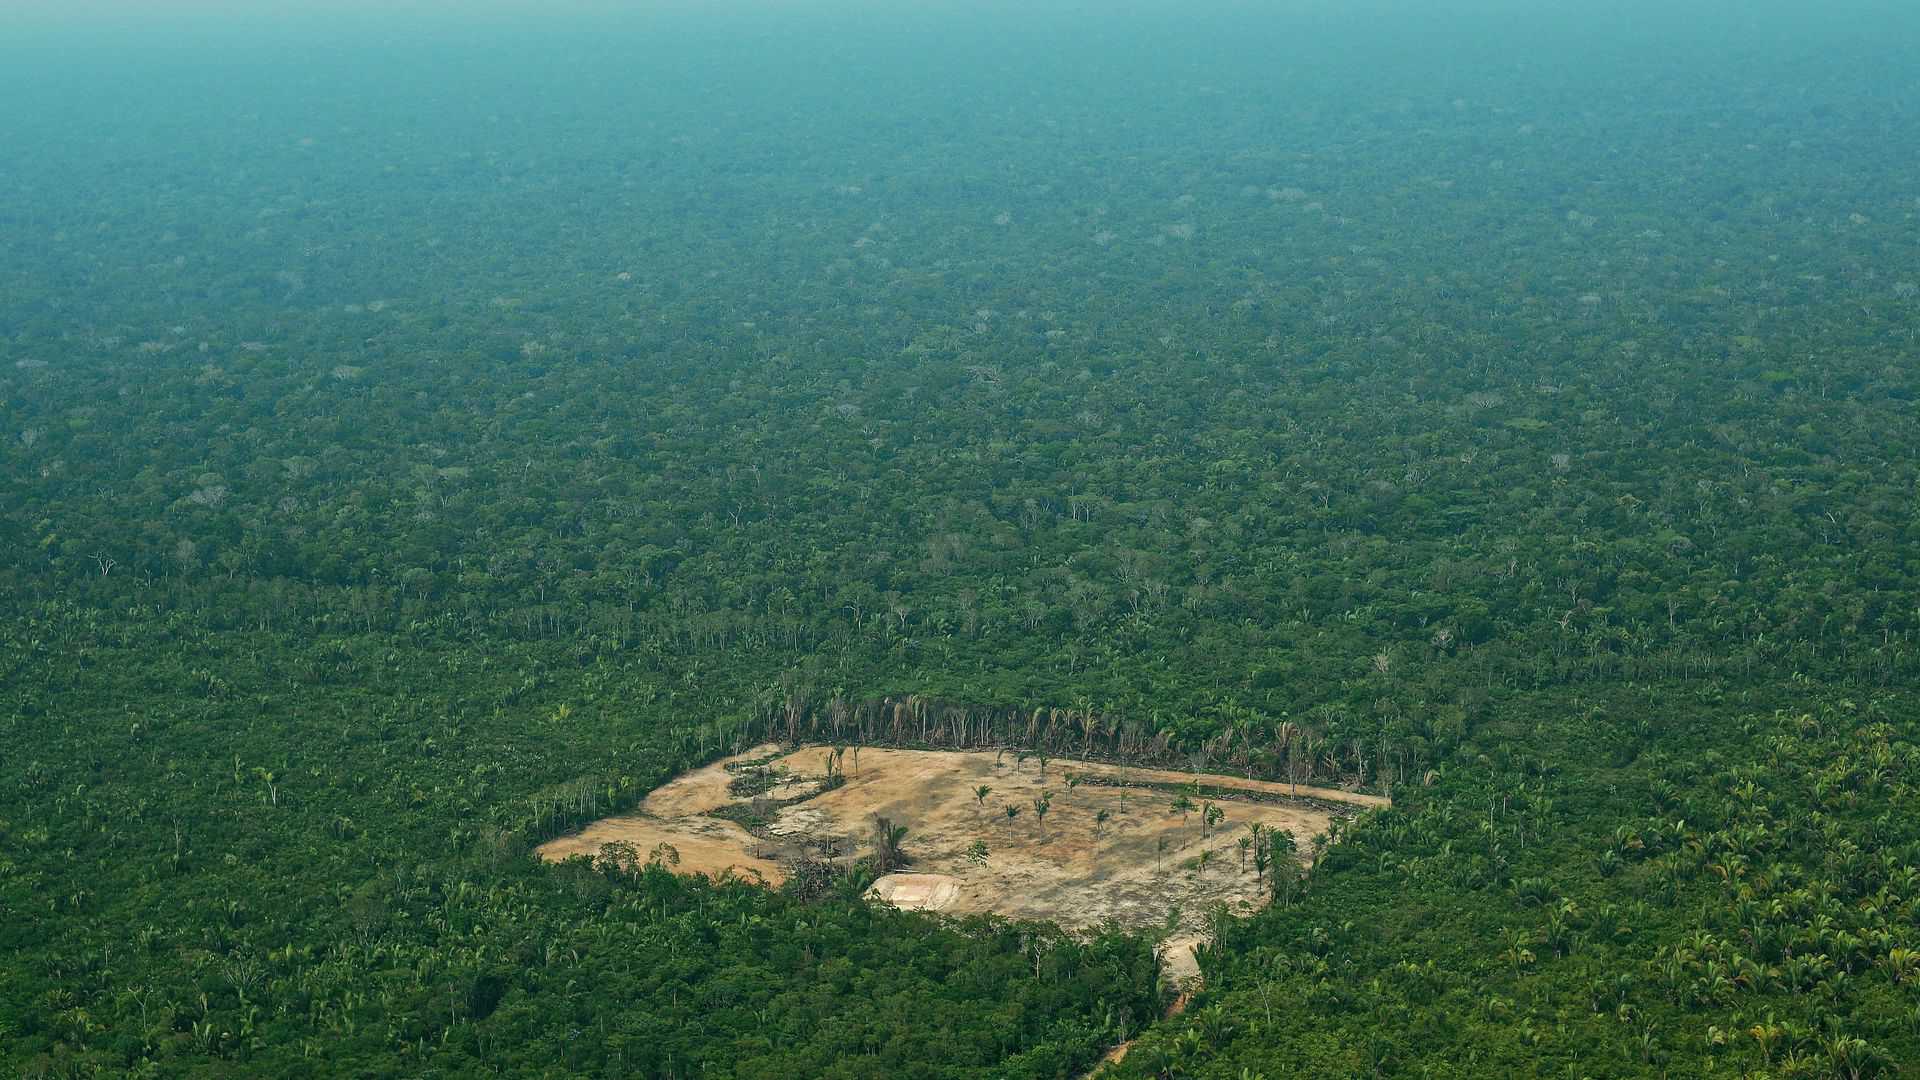 Deforestation of Amazon hits highest level in decade